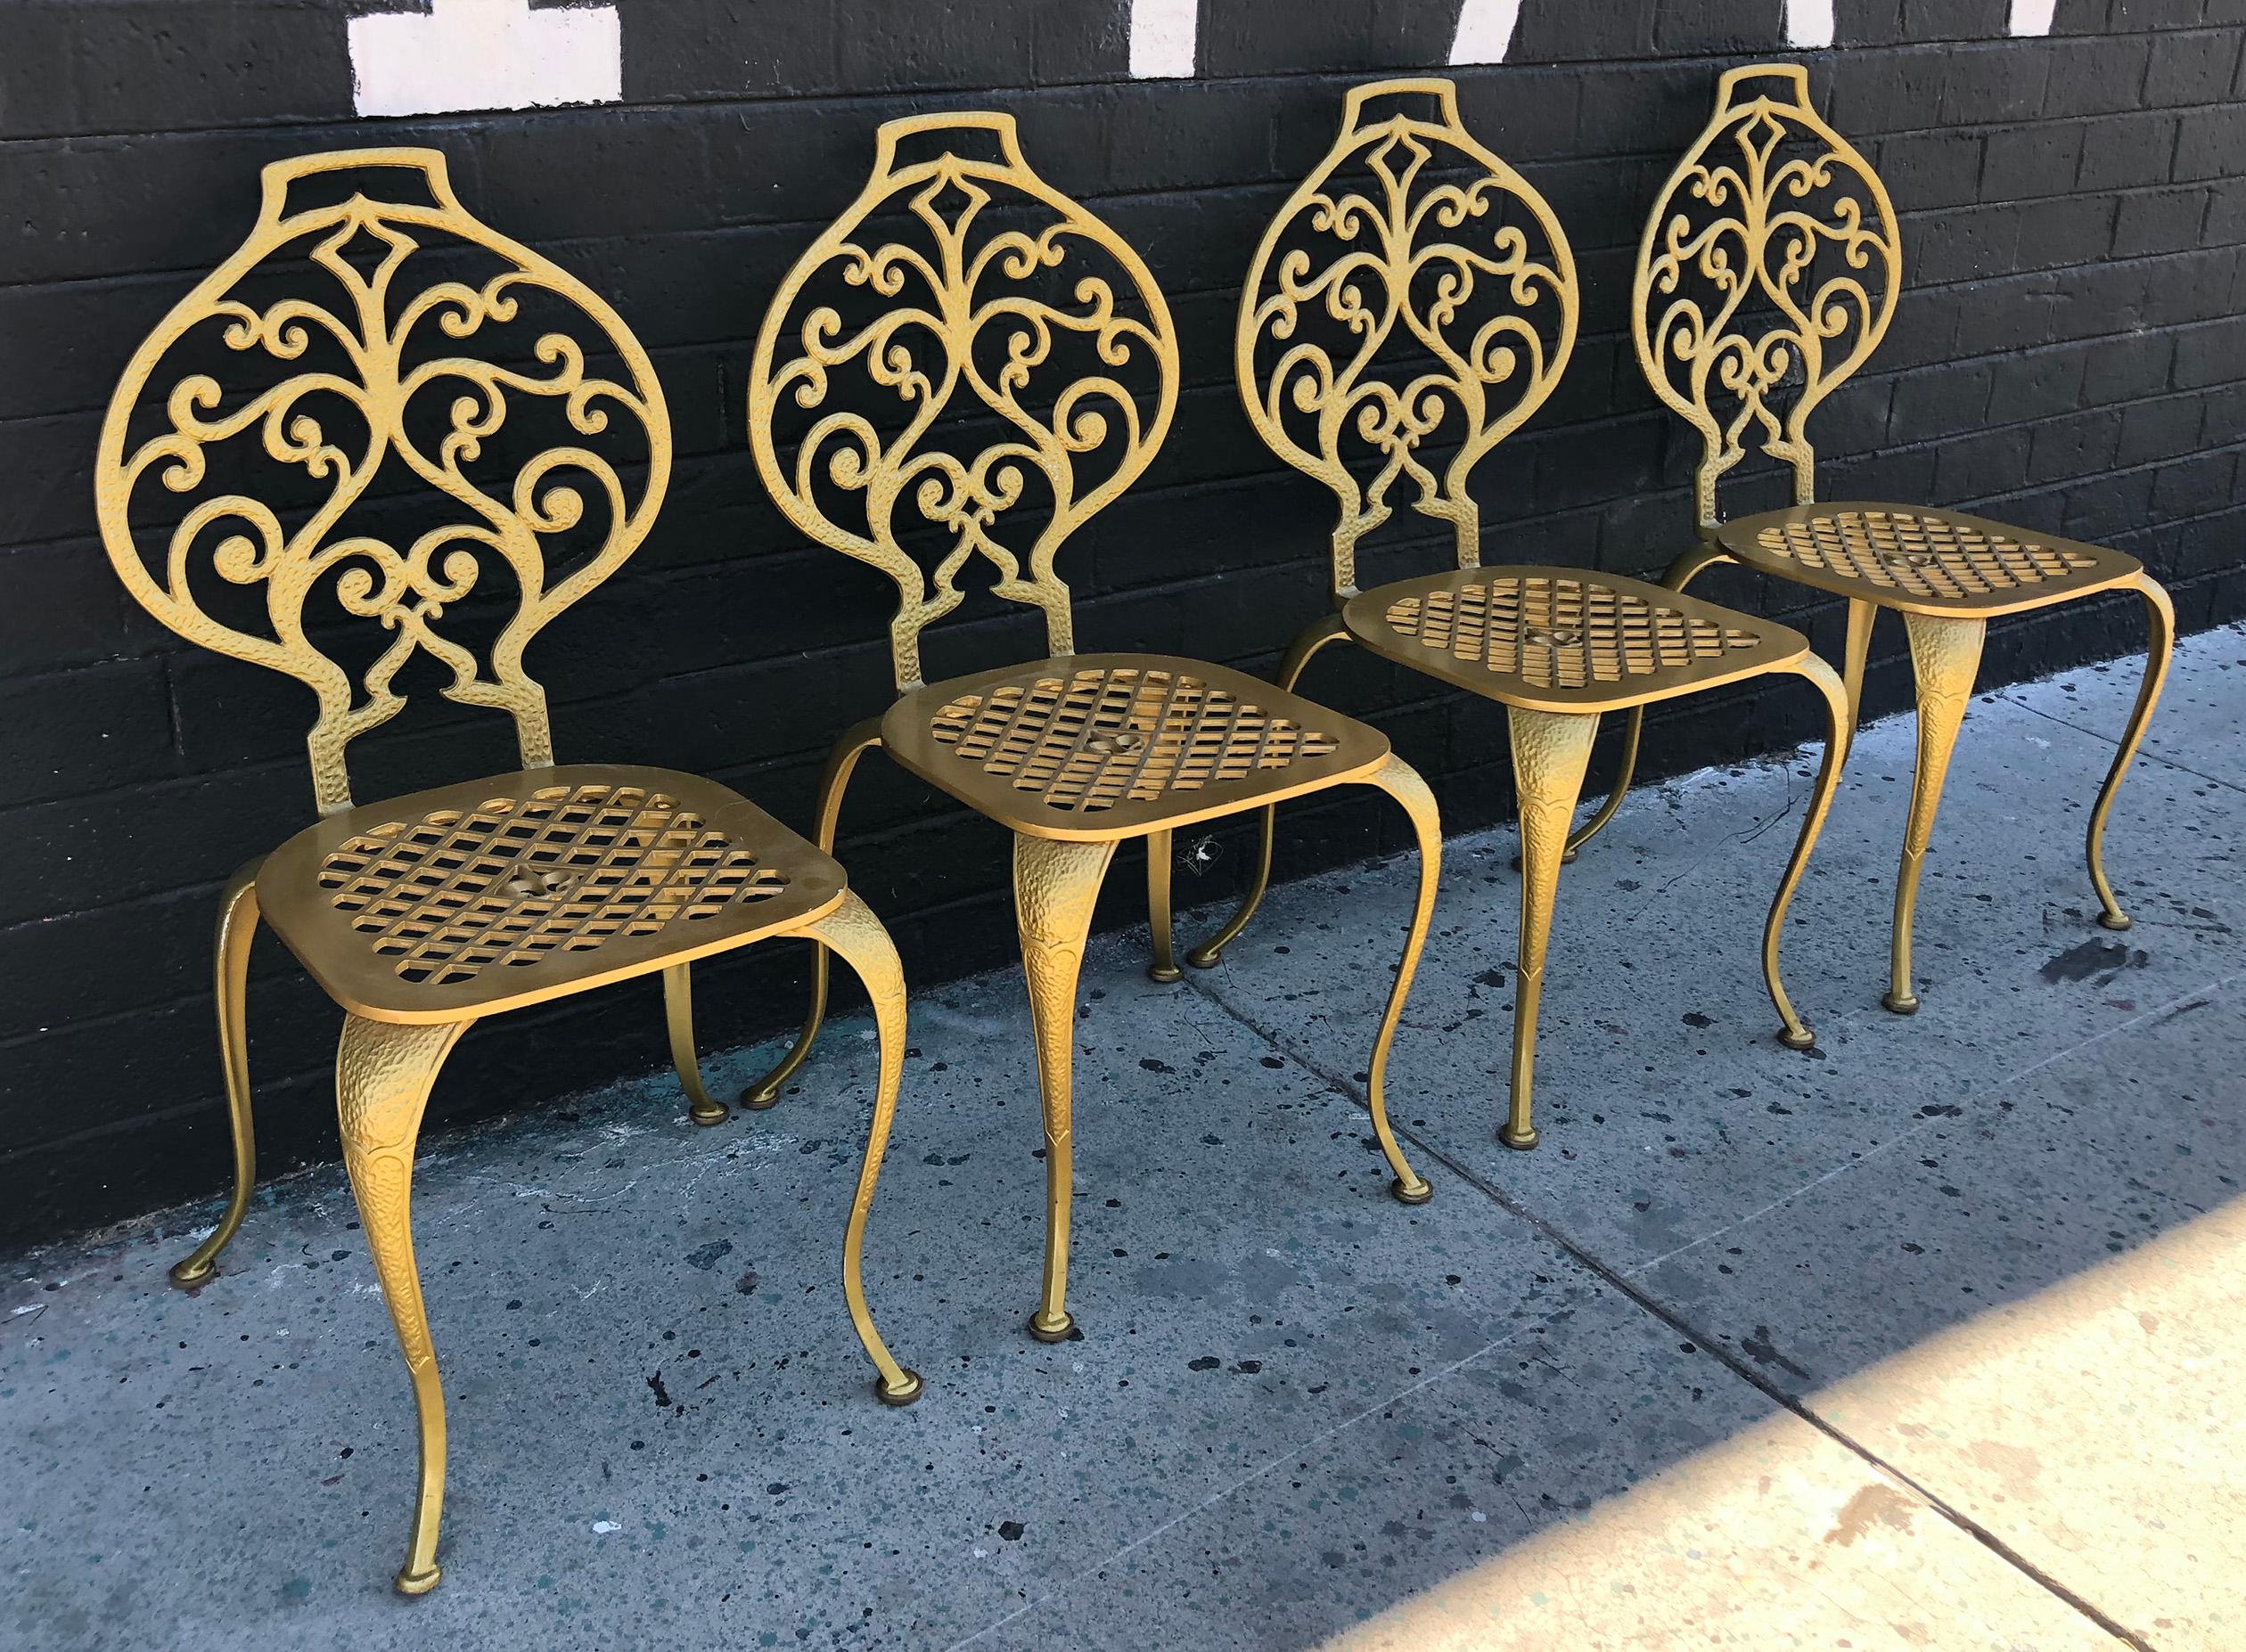 An absolutely stunning set of 4 Thinline dining chairs. The chairs have a solid aluminum body and feature a gorgeous fleur de lis design on the seats. 

These were meant to be indoor or outdoor chairs and come with their original (signed) cushions